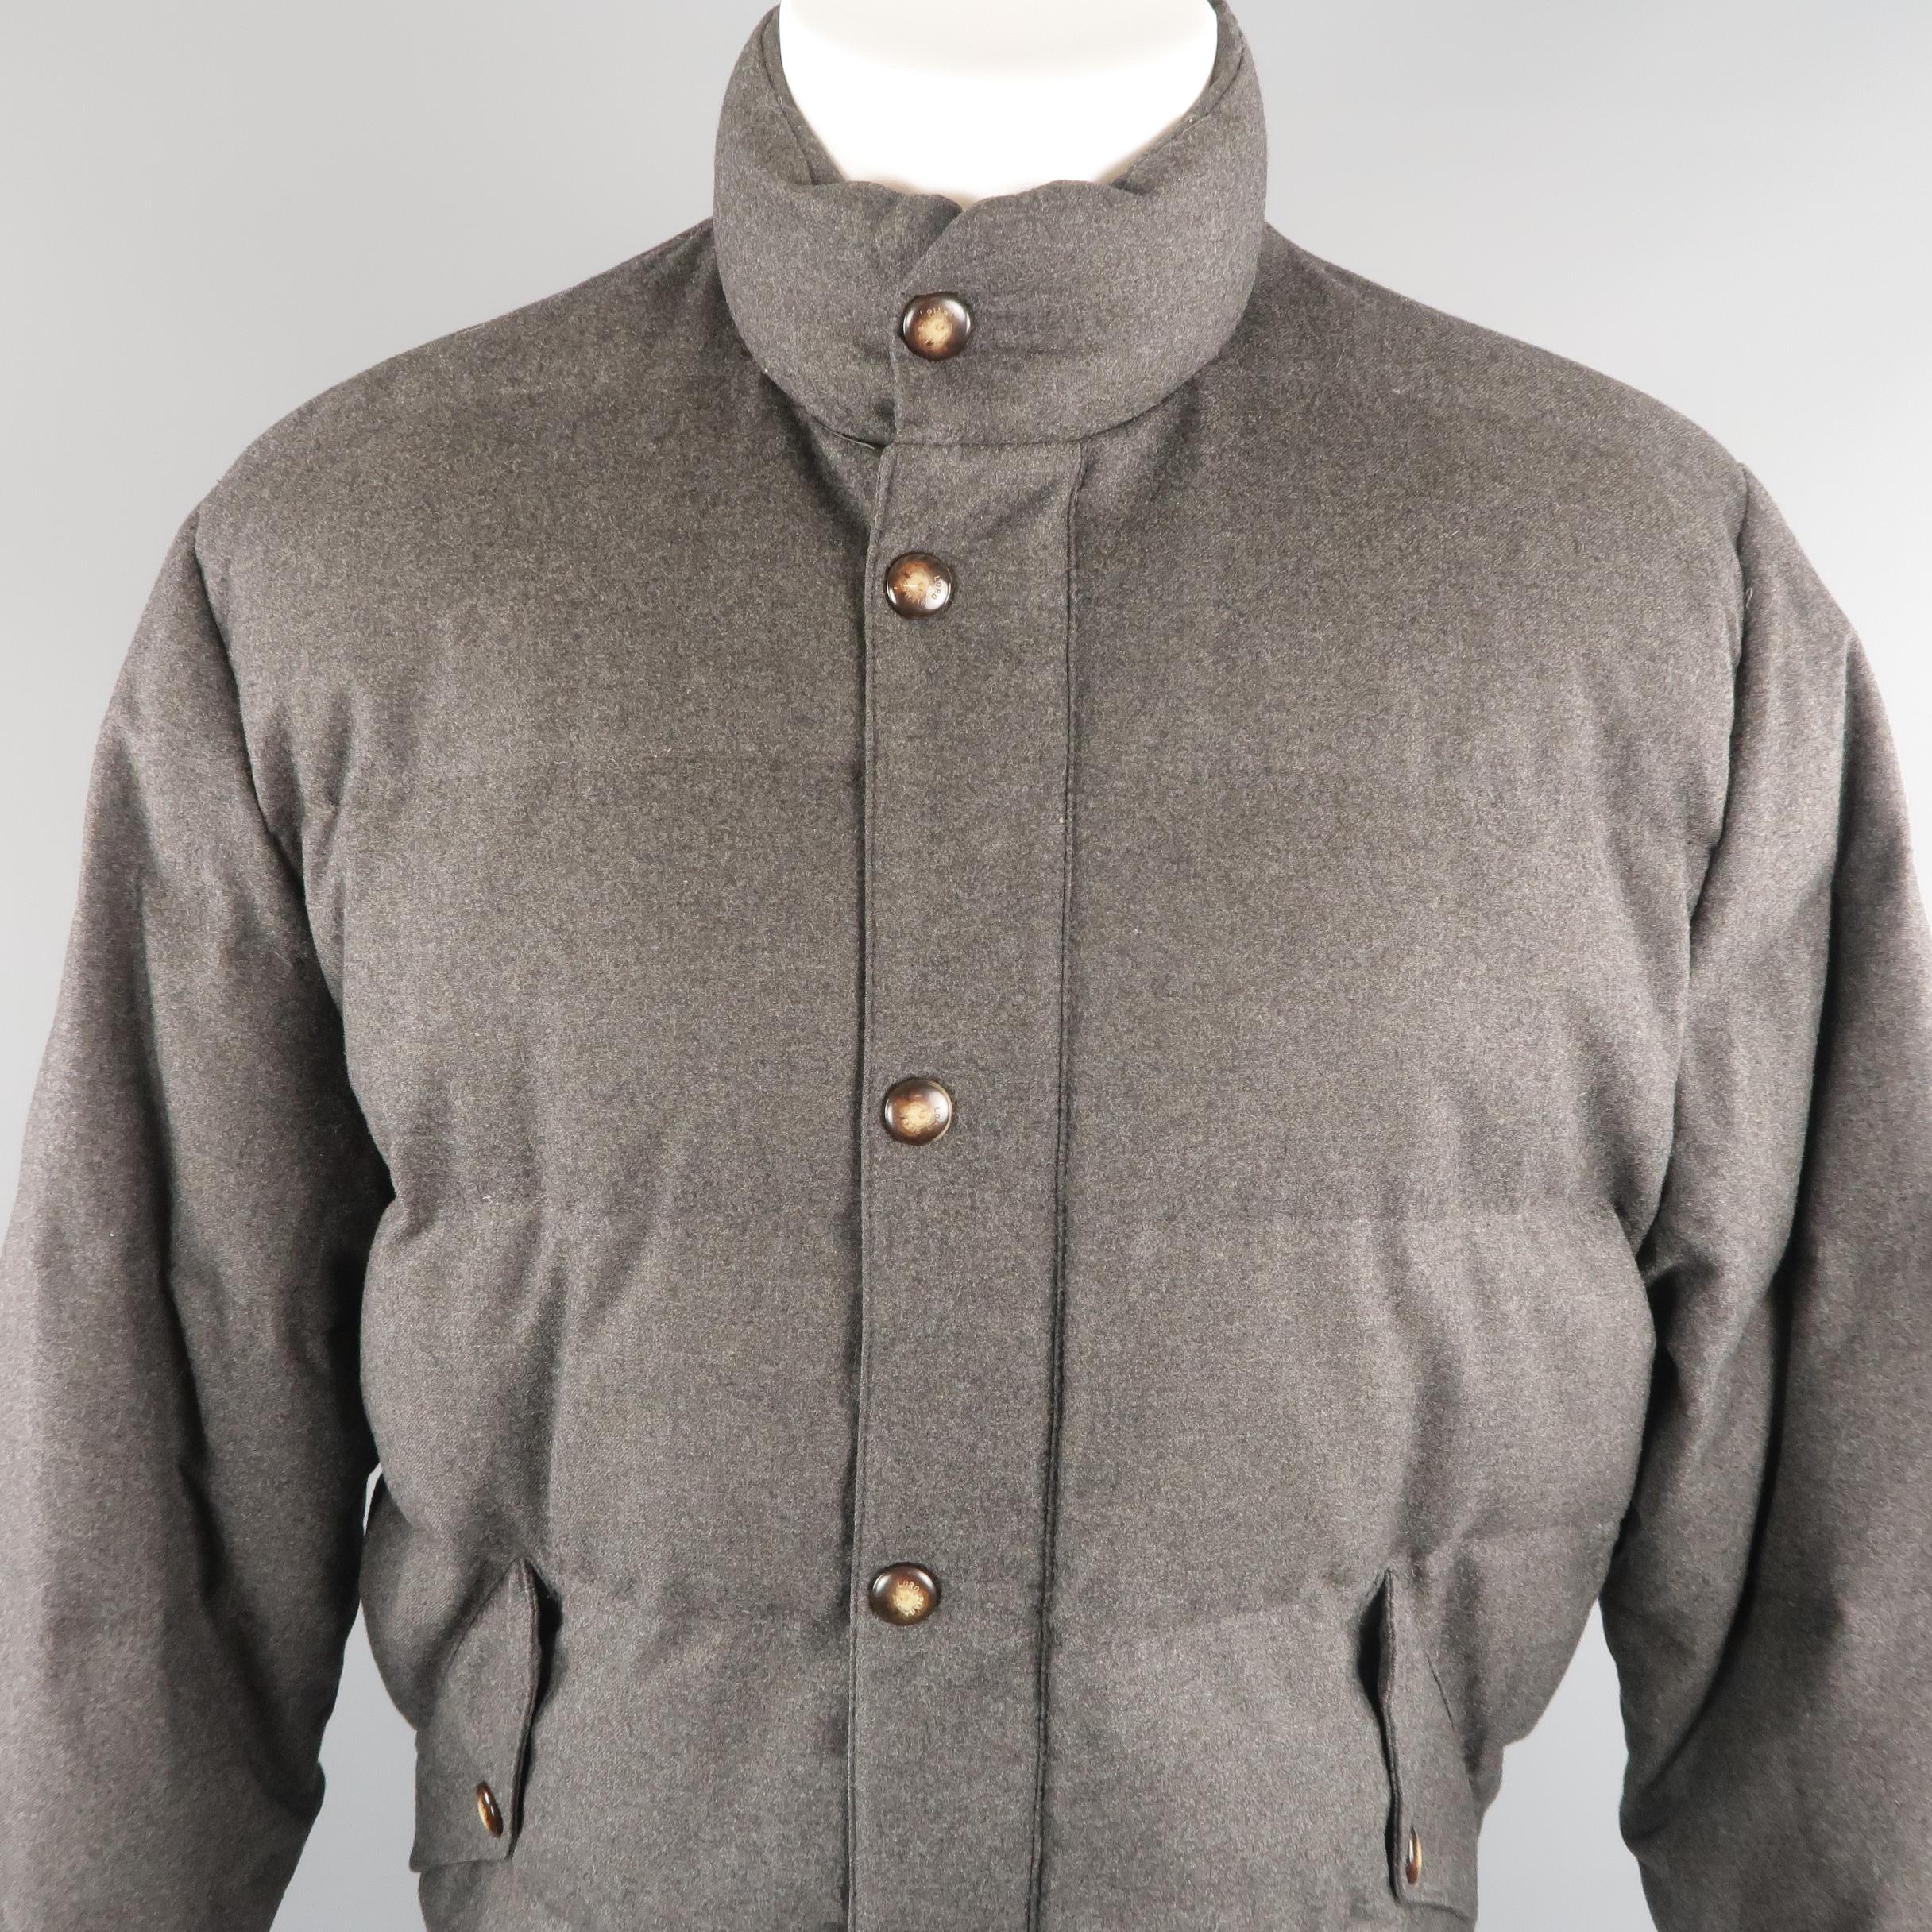 LORO PIANA puffer quilted  jacket come in charcoal tone in wool material, with flap pockets and adjusters on the cuffs. Made in Italy.
 
Excellent Pre-Owned Condition.
Marked: M
 
Measurements:
 
Shoulder: 20 in.
Chest: 100 in.
Sleeve: 25